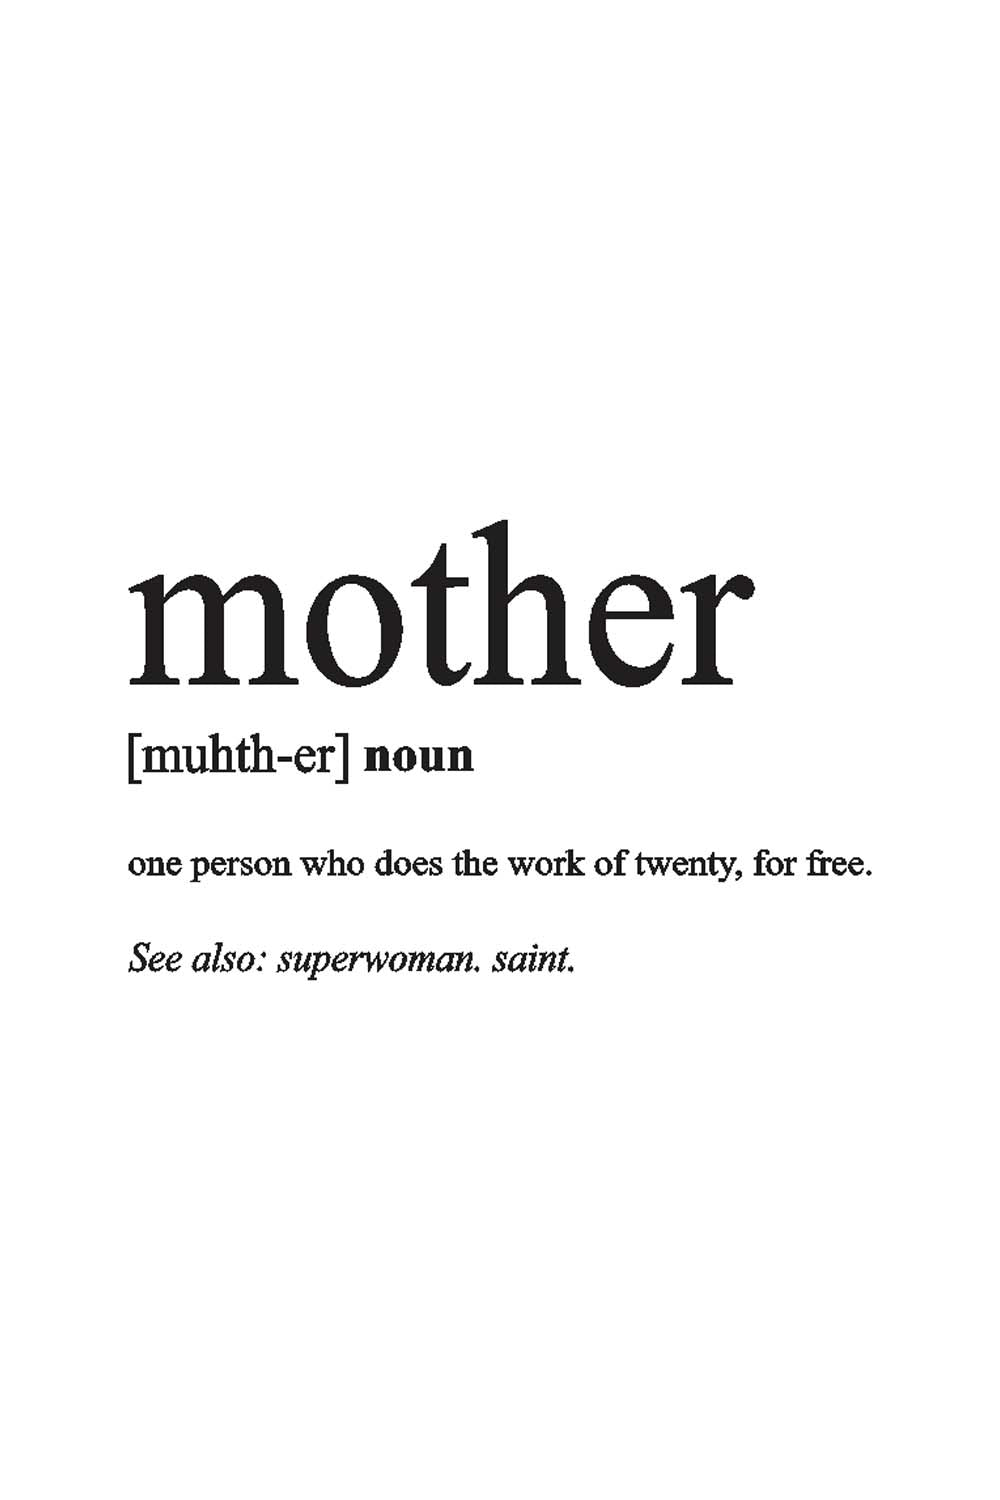 Mother Meaning  - Glass Framed Poster